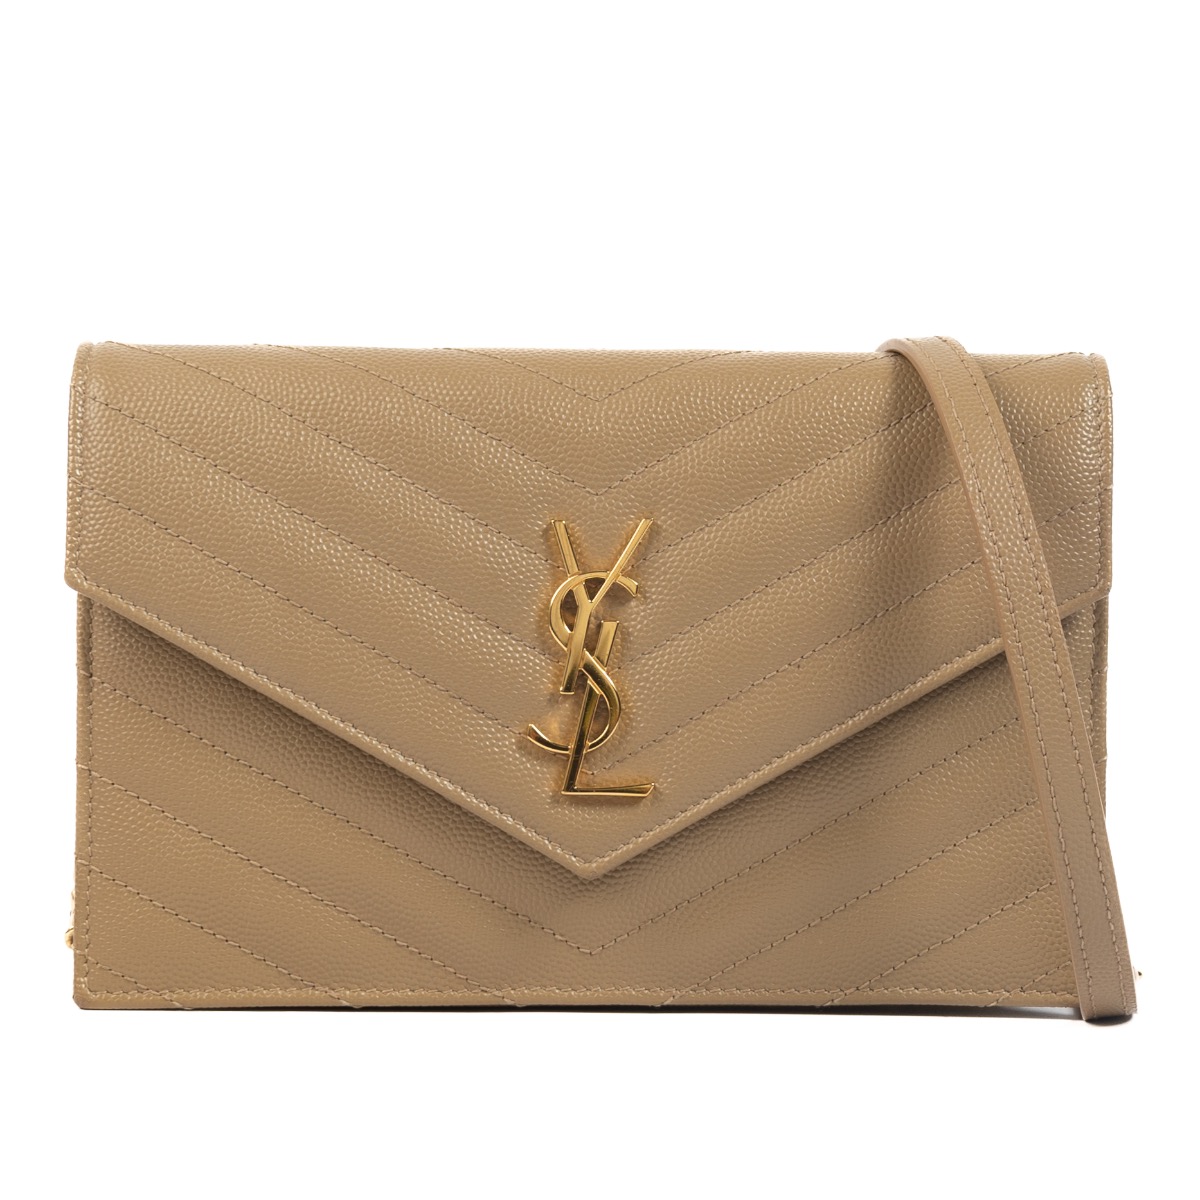 Yves Saint Laurent, Bags, Ysl New Gold Chain Wallet Purse